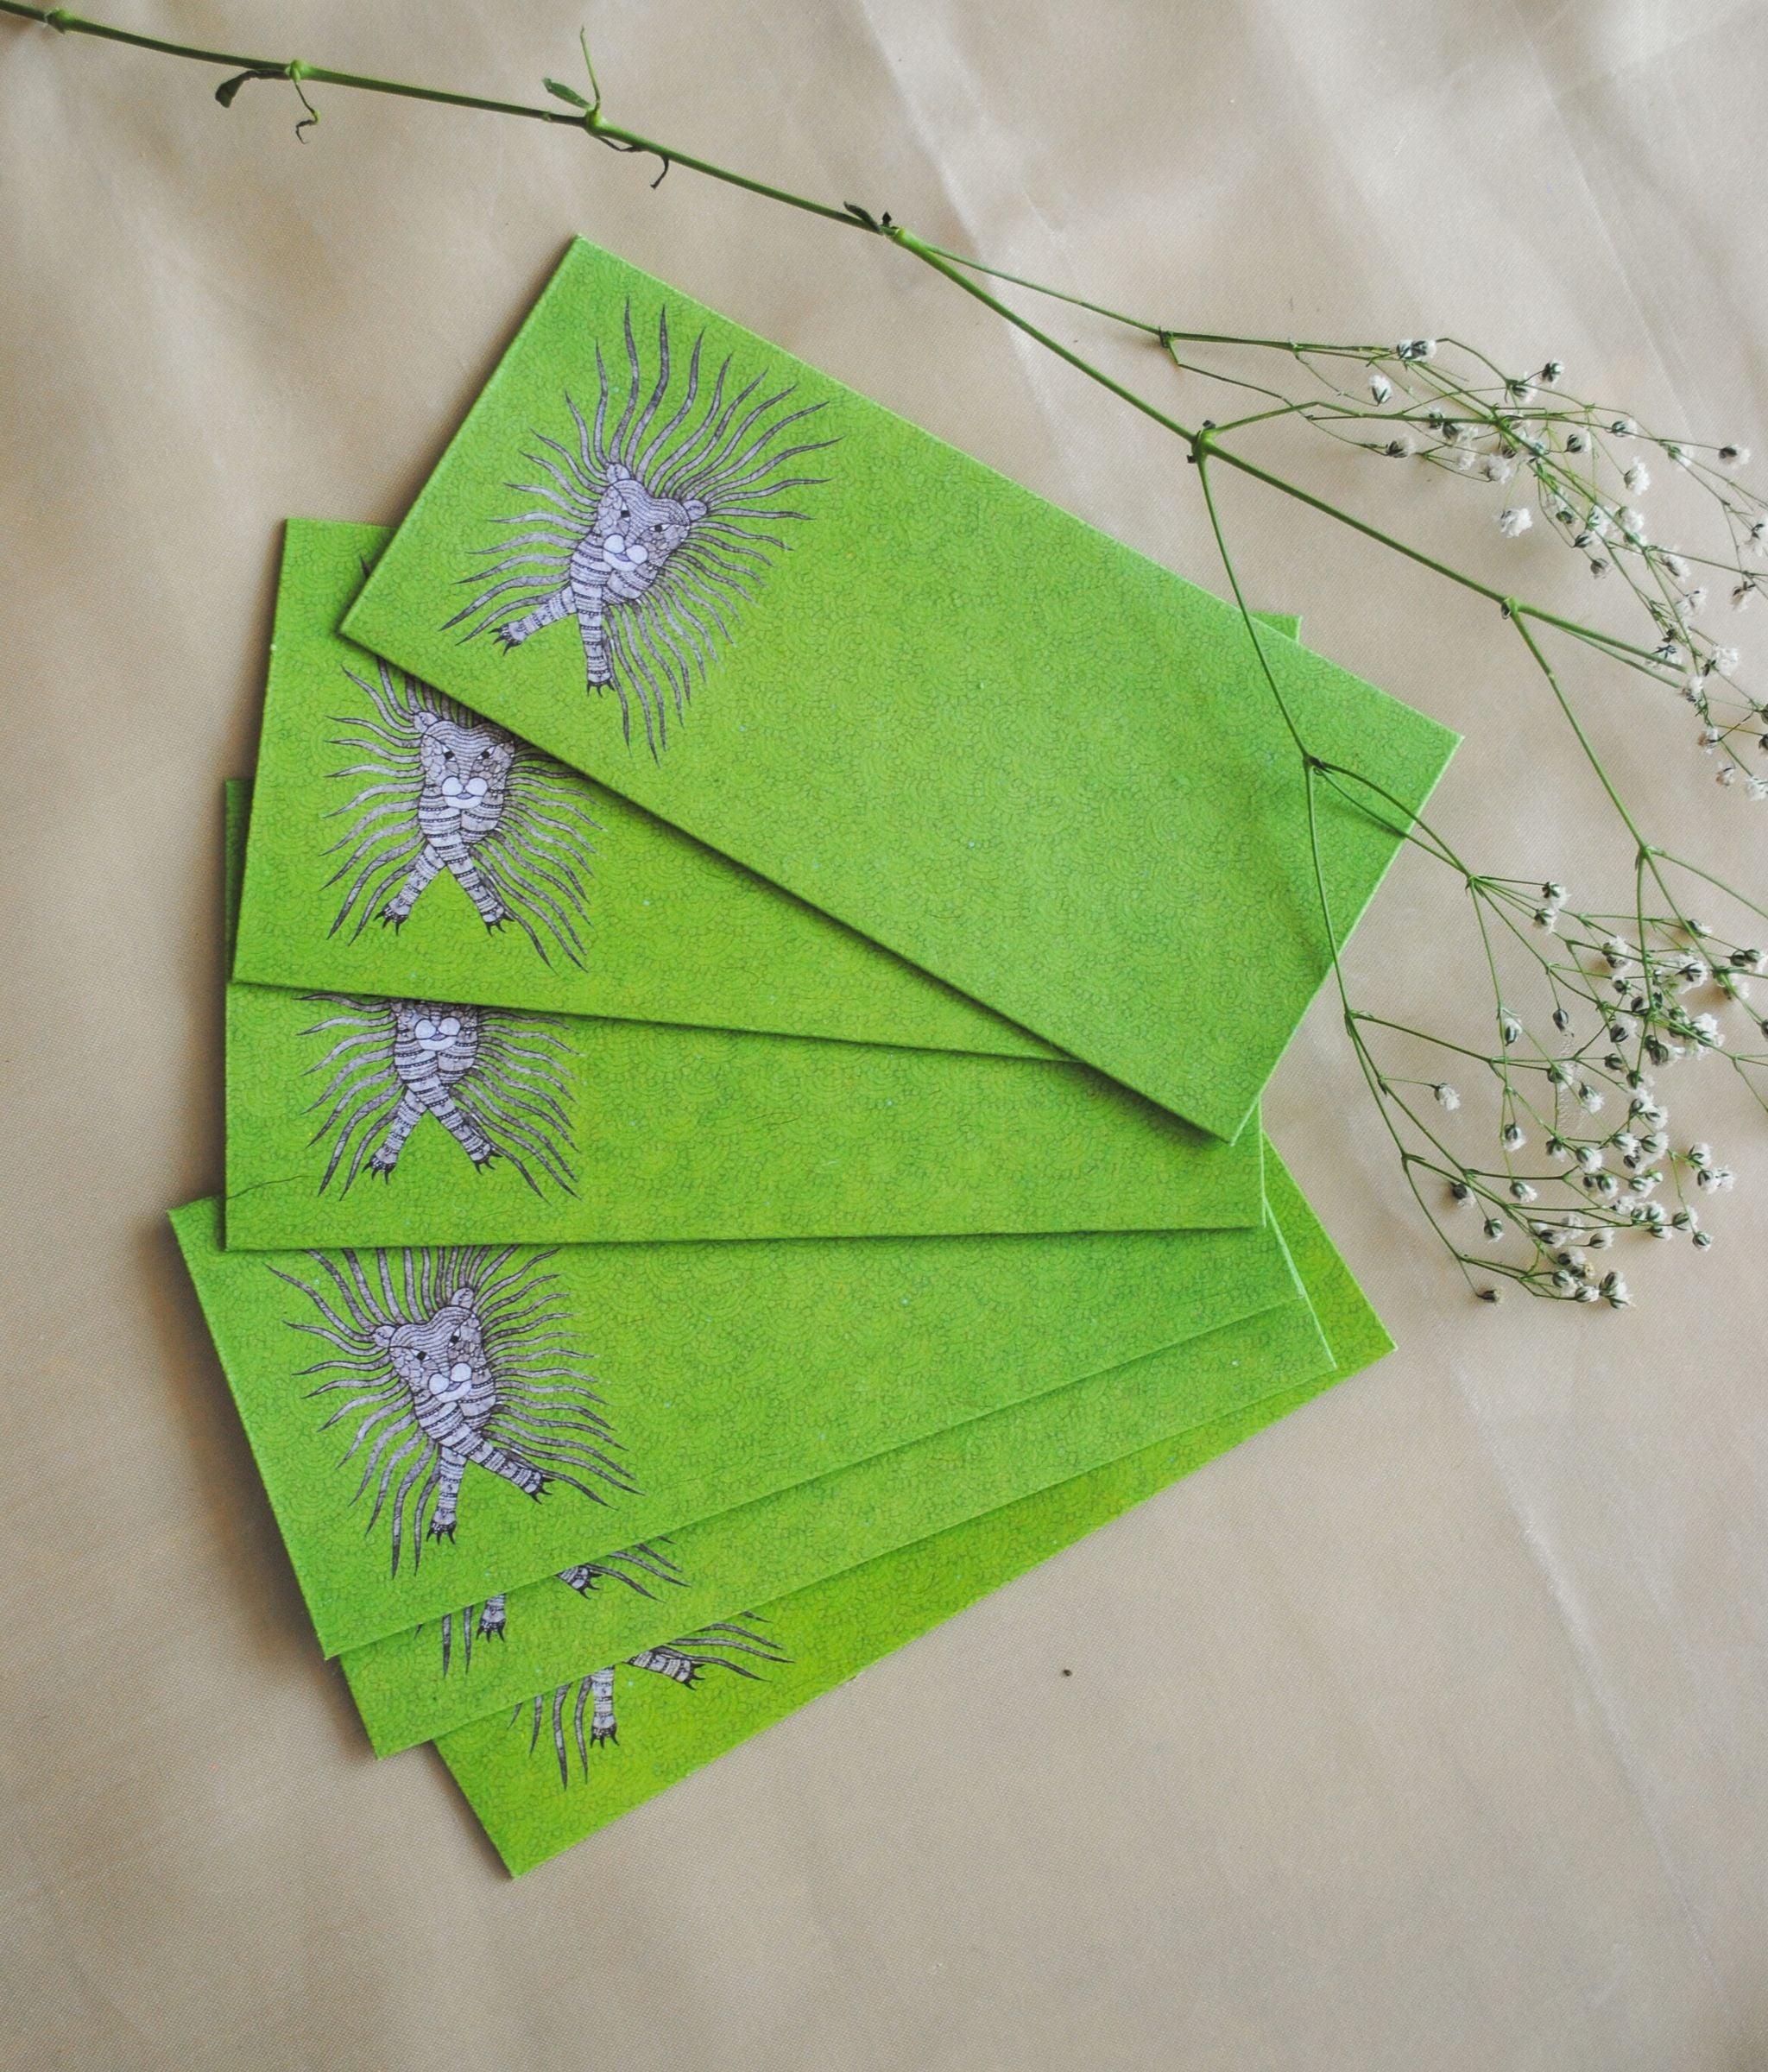 Make your Loved ones Christmas & New year Special, gift them handmade cards